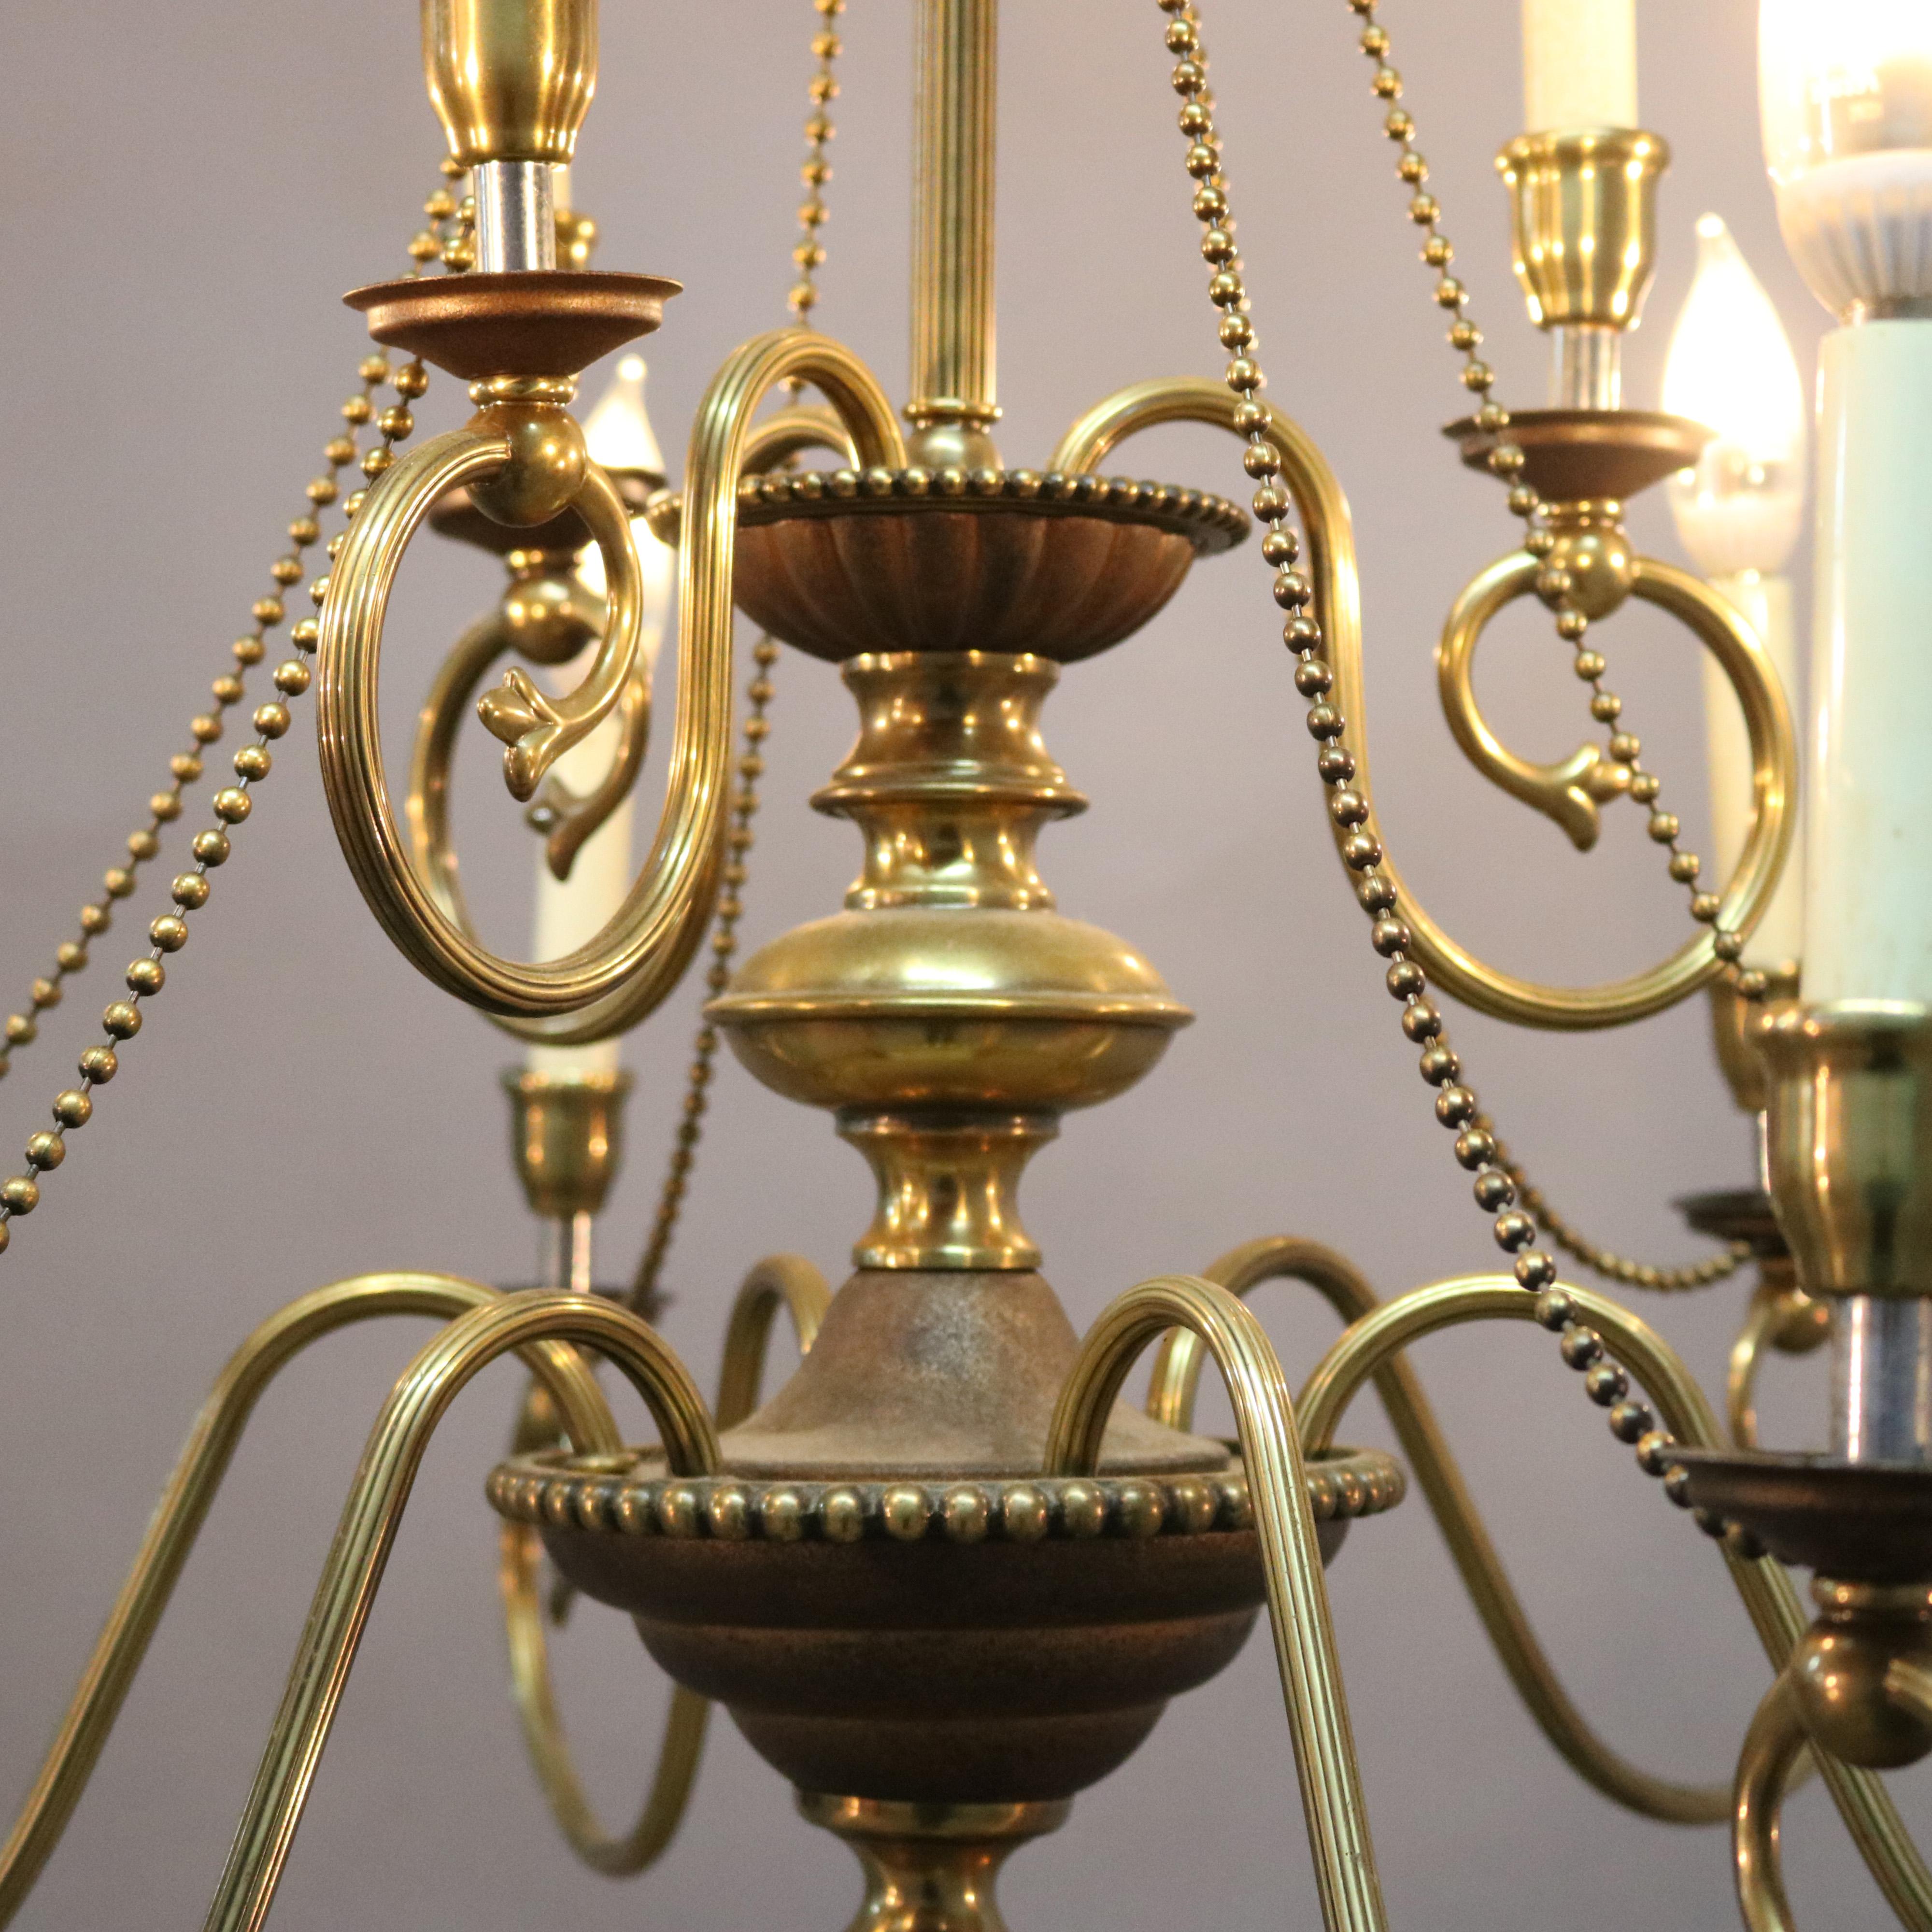 Glass Vintage French Nine-Light Tiered Brass and Crystal Chandelier, 20th Century For Sale